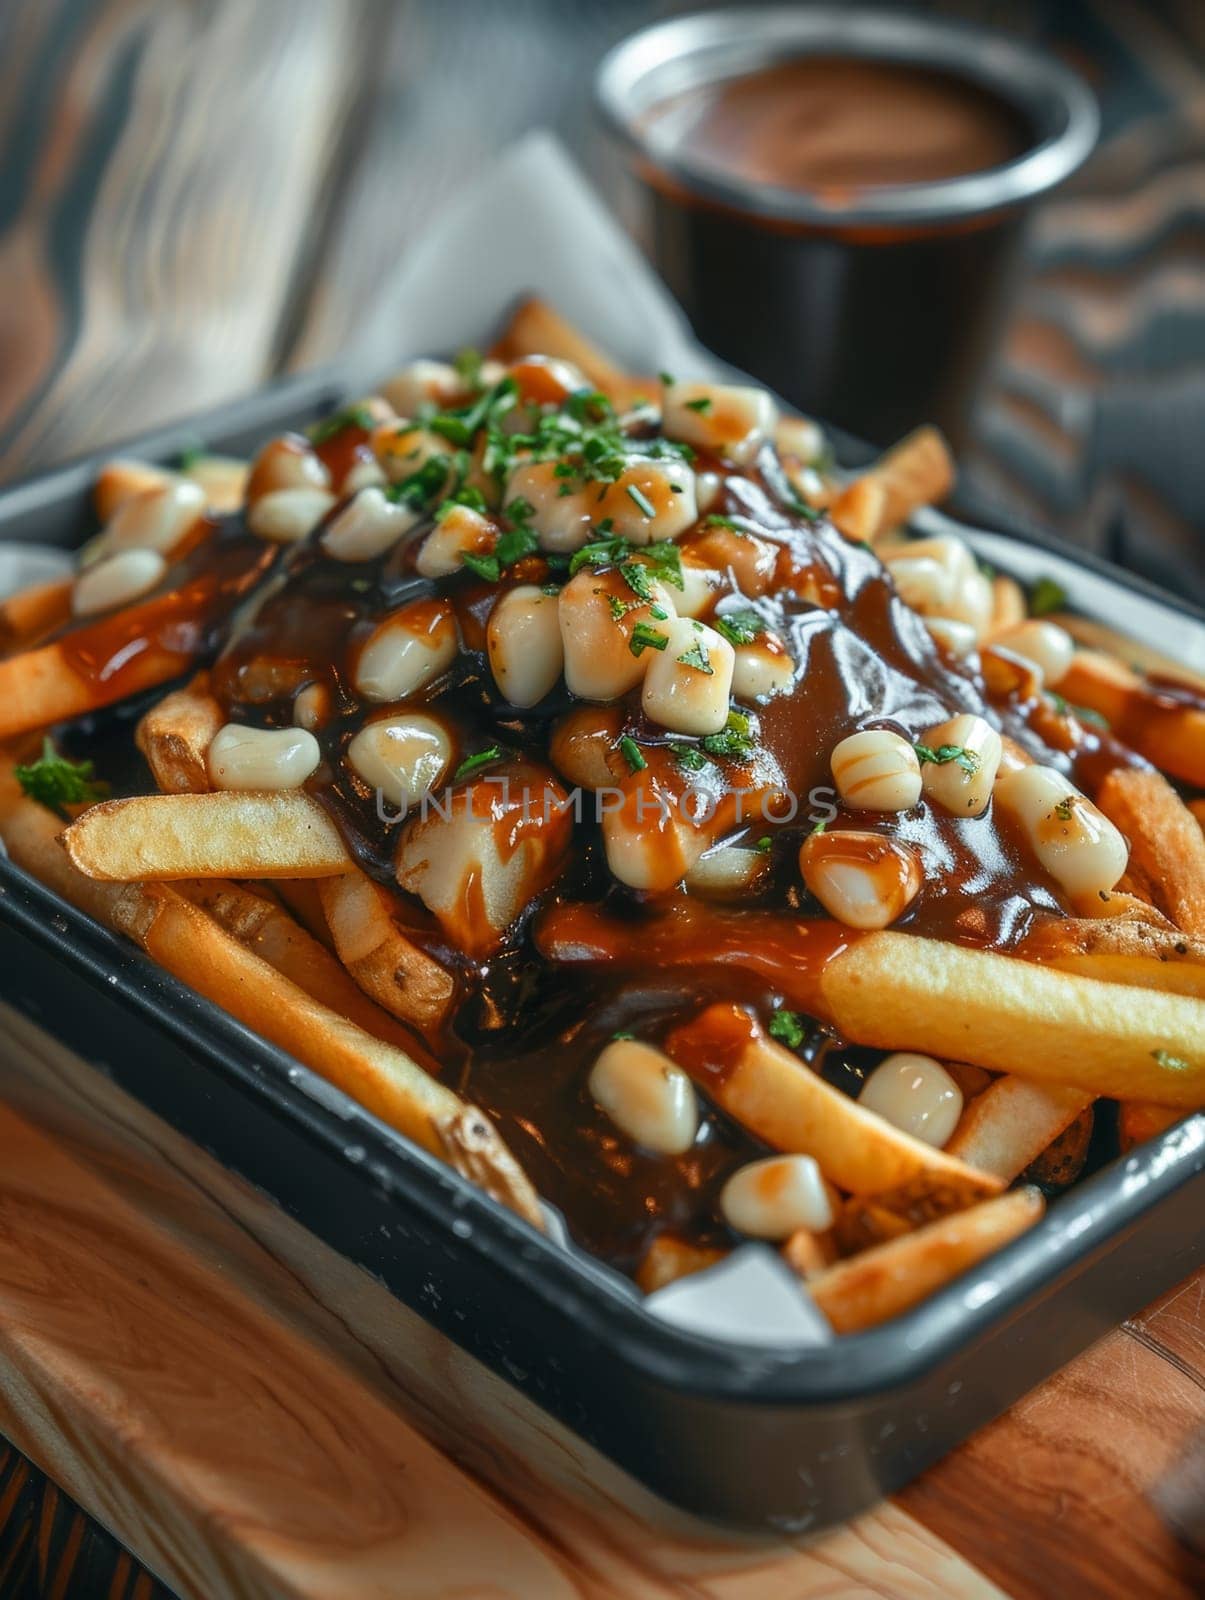 Authentic Canadian poutine with golden fries, squeaky cheese curds, and rich brown gravy served in a tray, capturing the comforting and indulgent essence of this beloved French-Canadian culinary. by sfinks